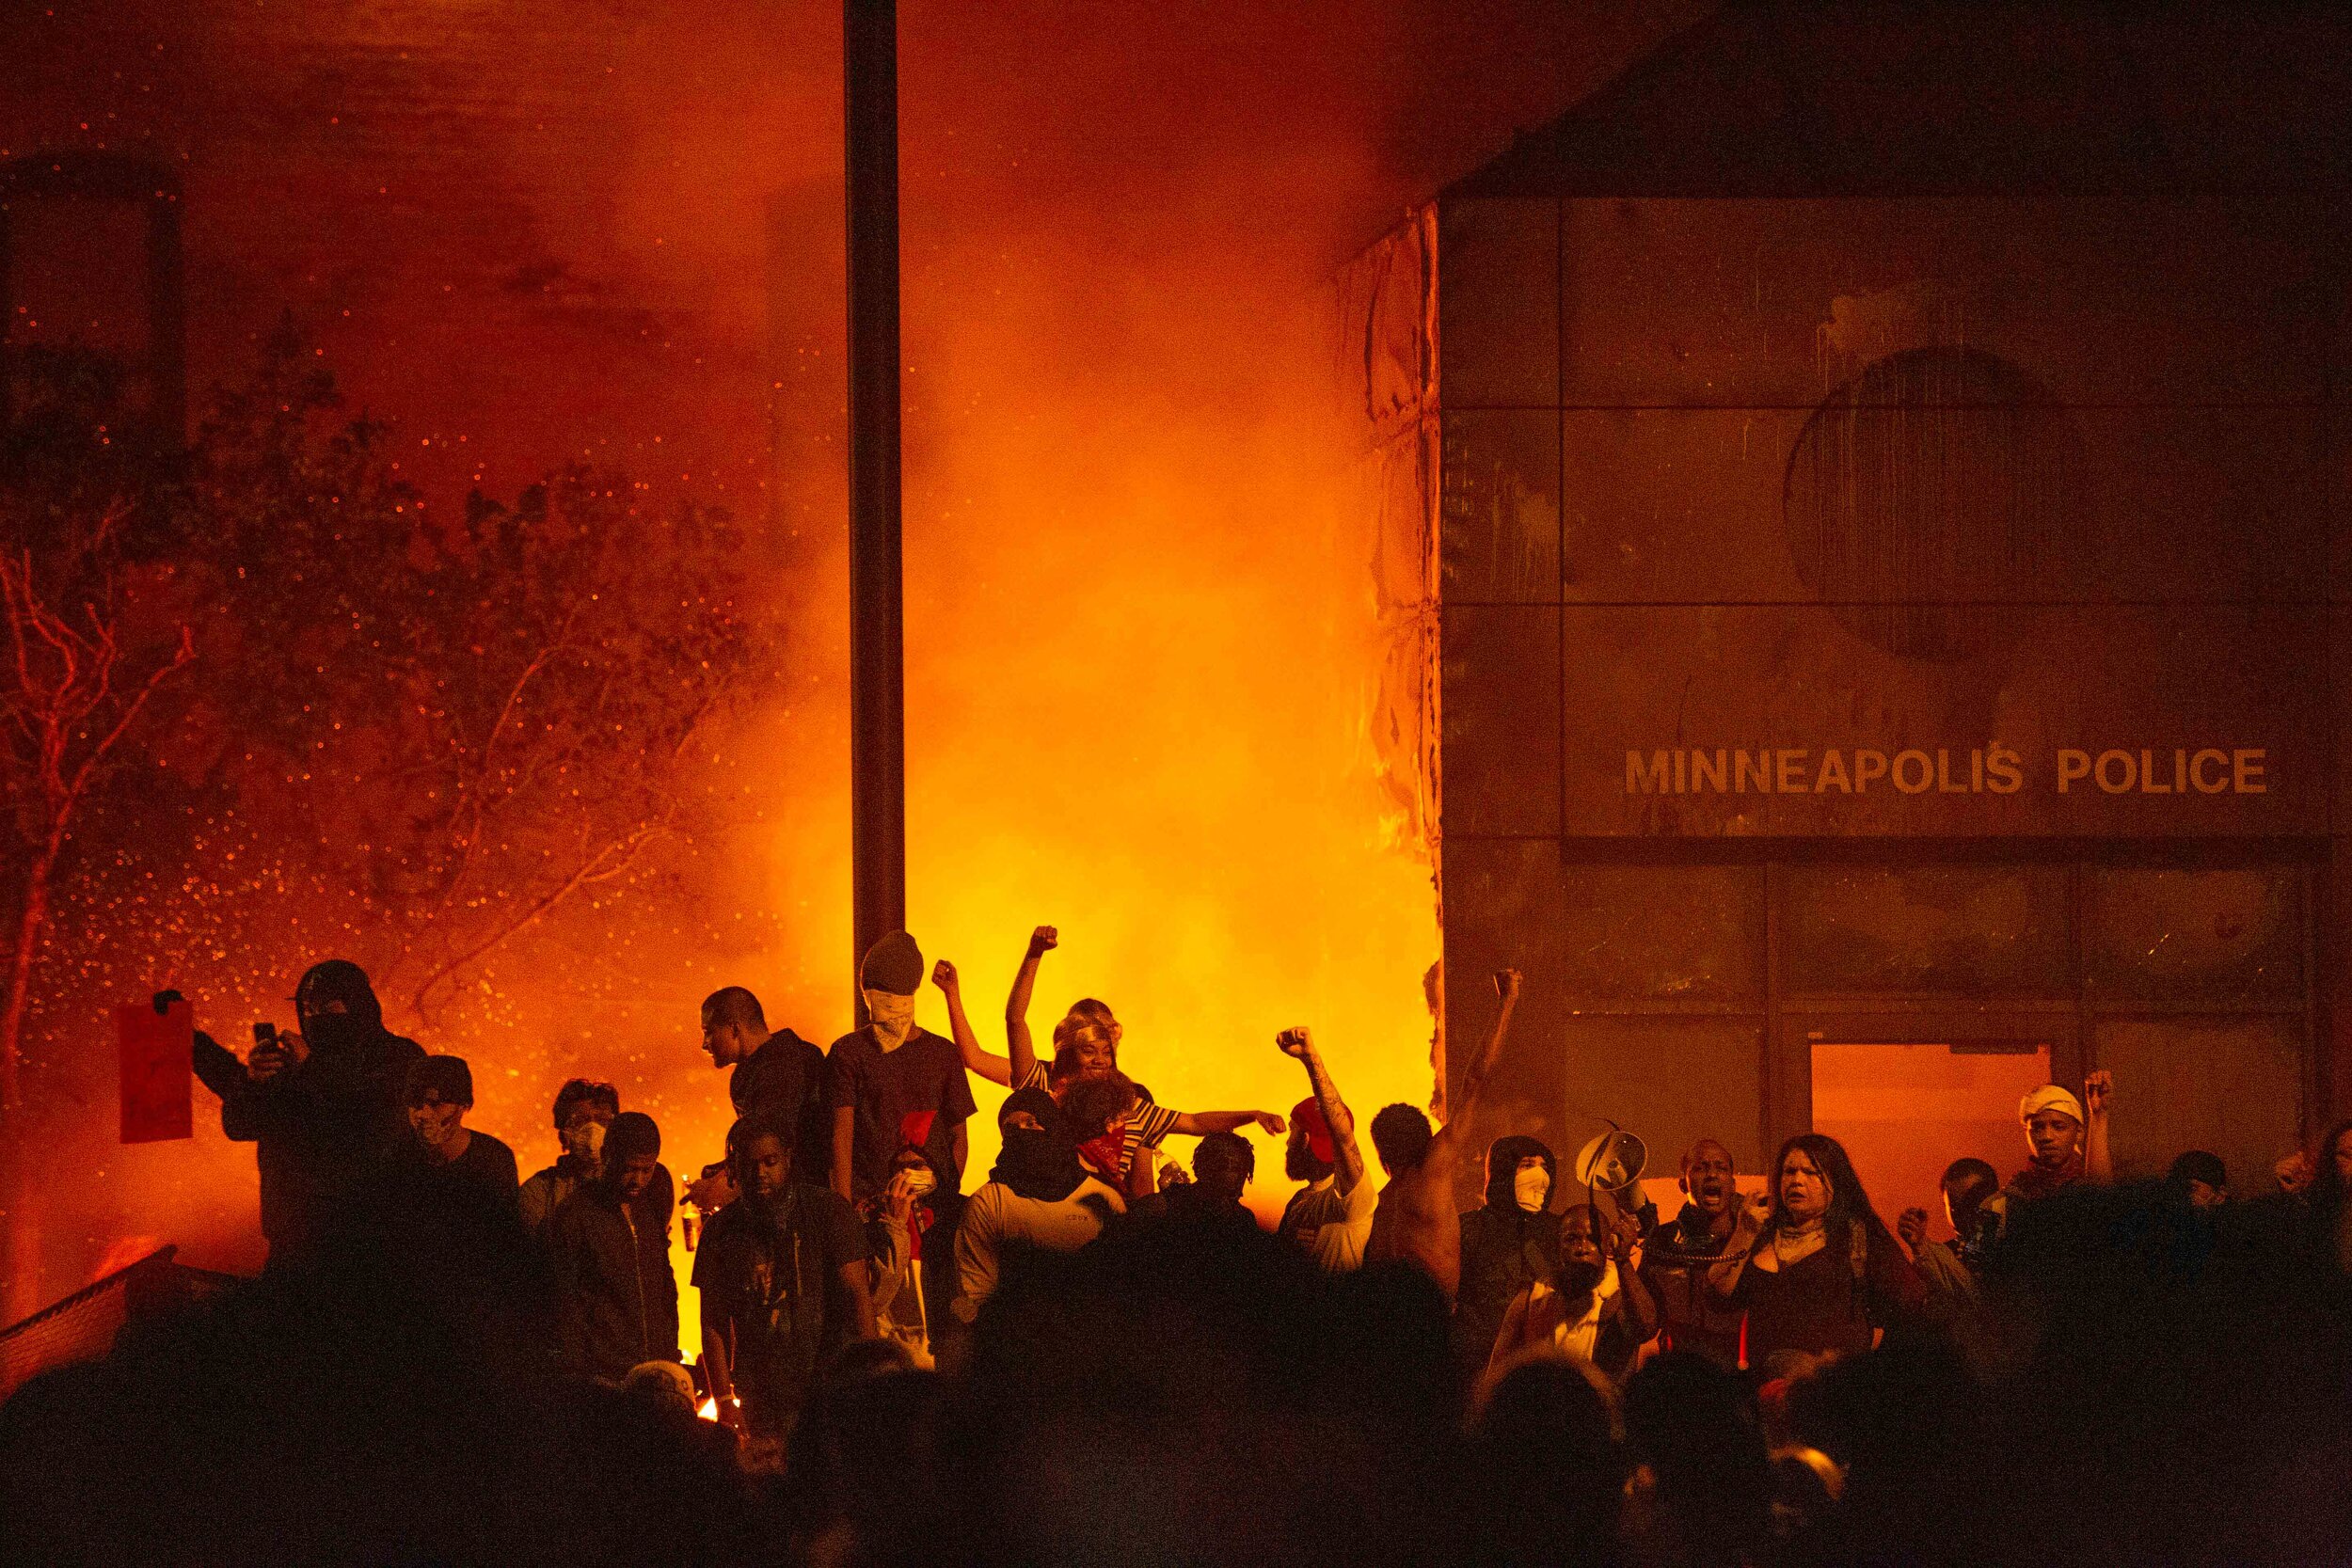  Protesters raise their fists as the 3rd police precinct burns in Minneapolis, Minnesota behind them during a riot over the killing of George Floyd on May 28, 2020. 